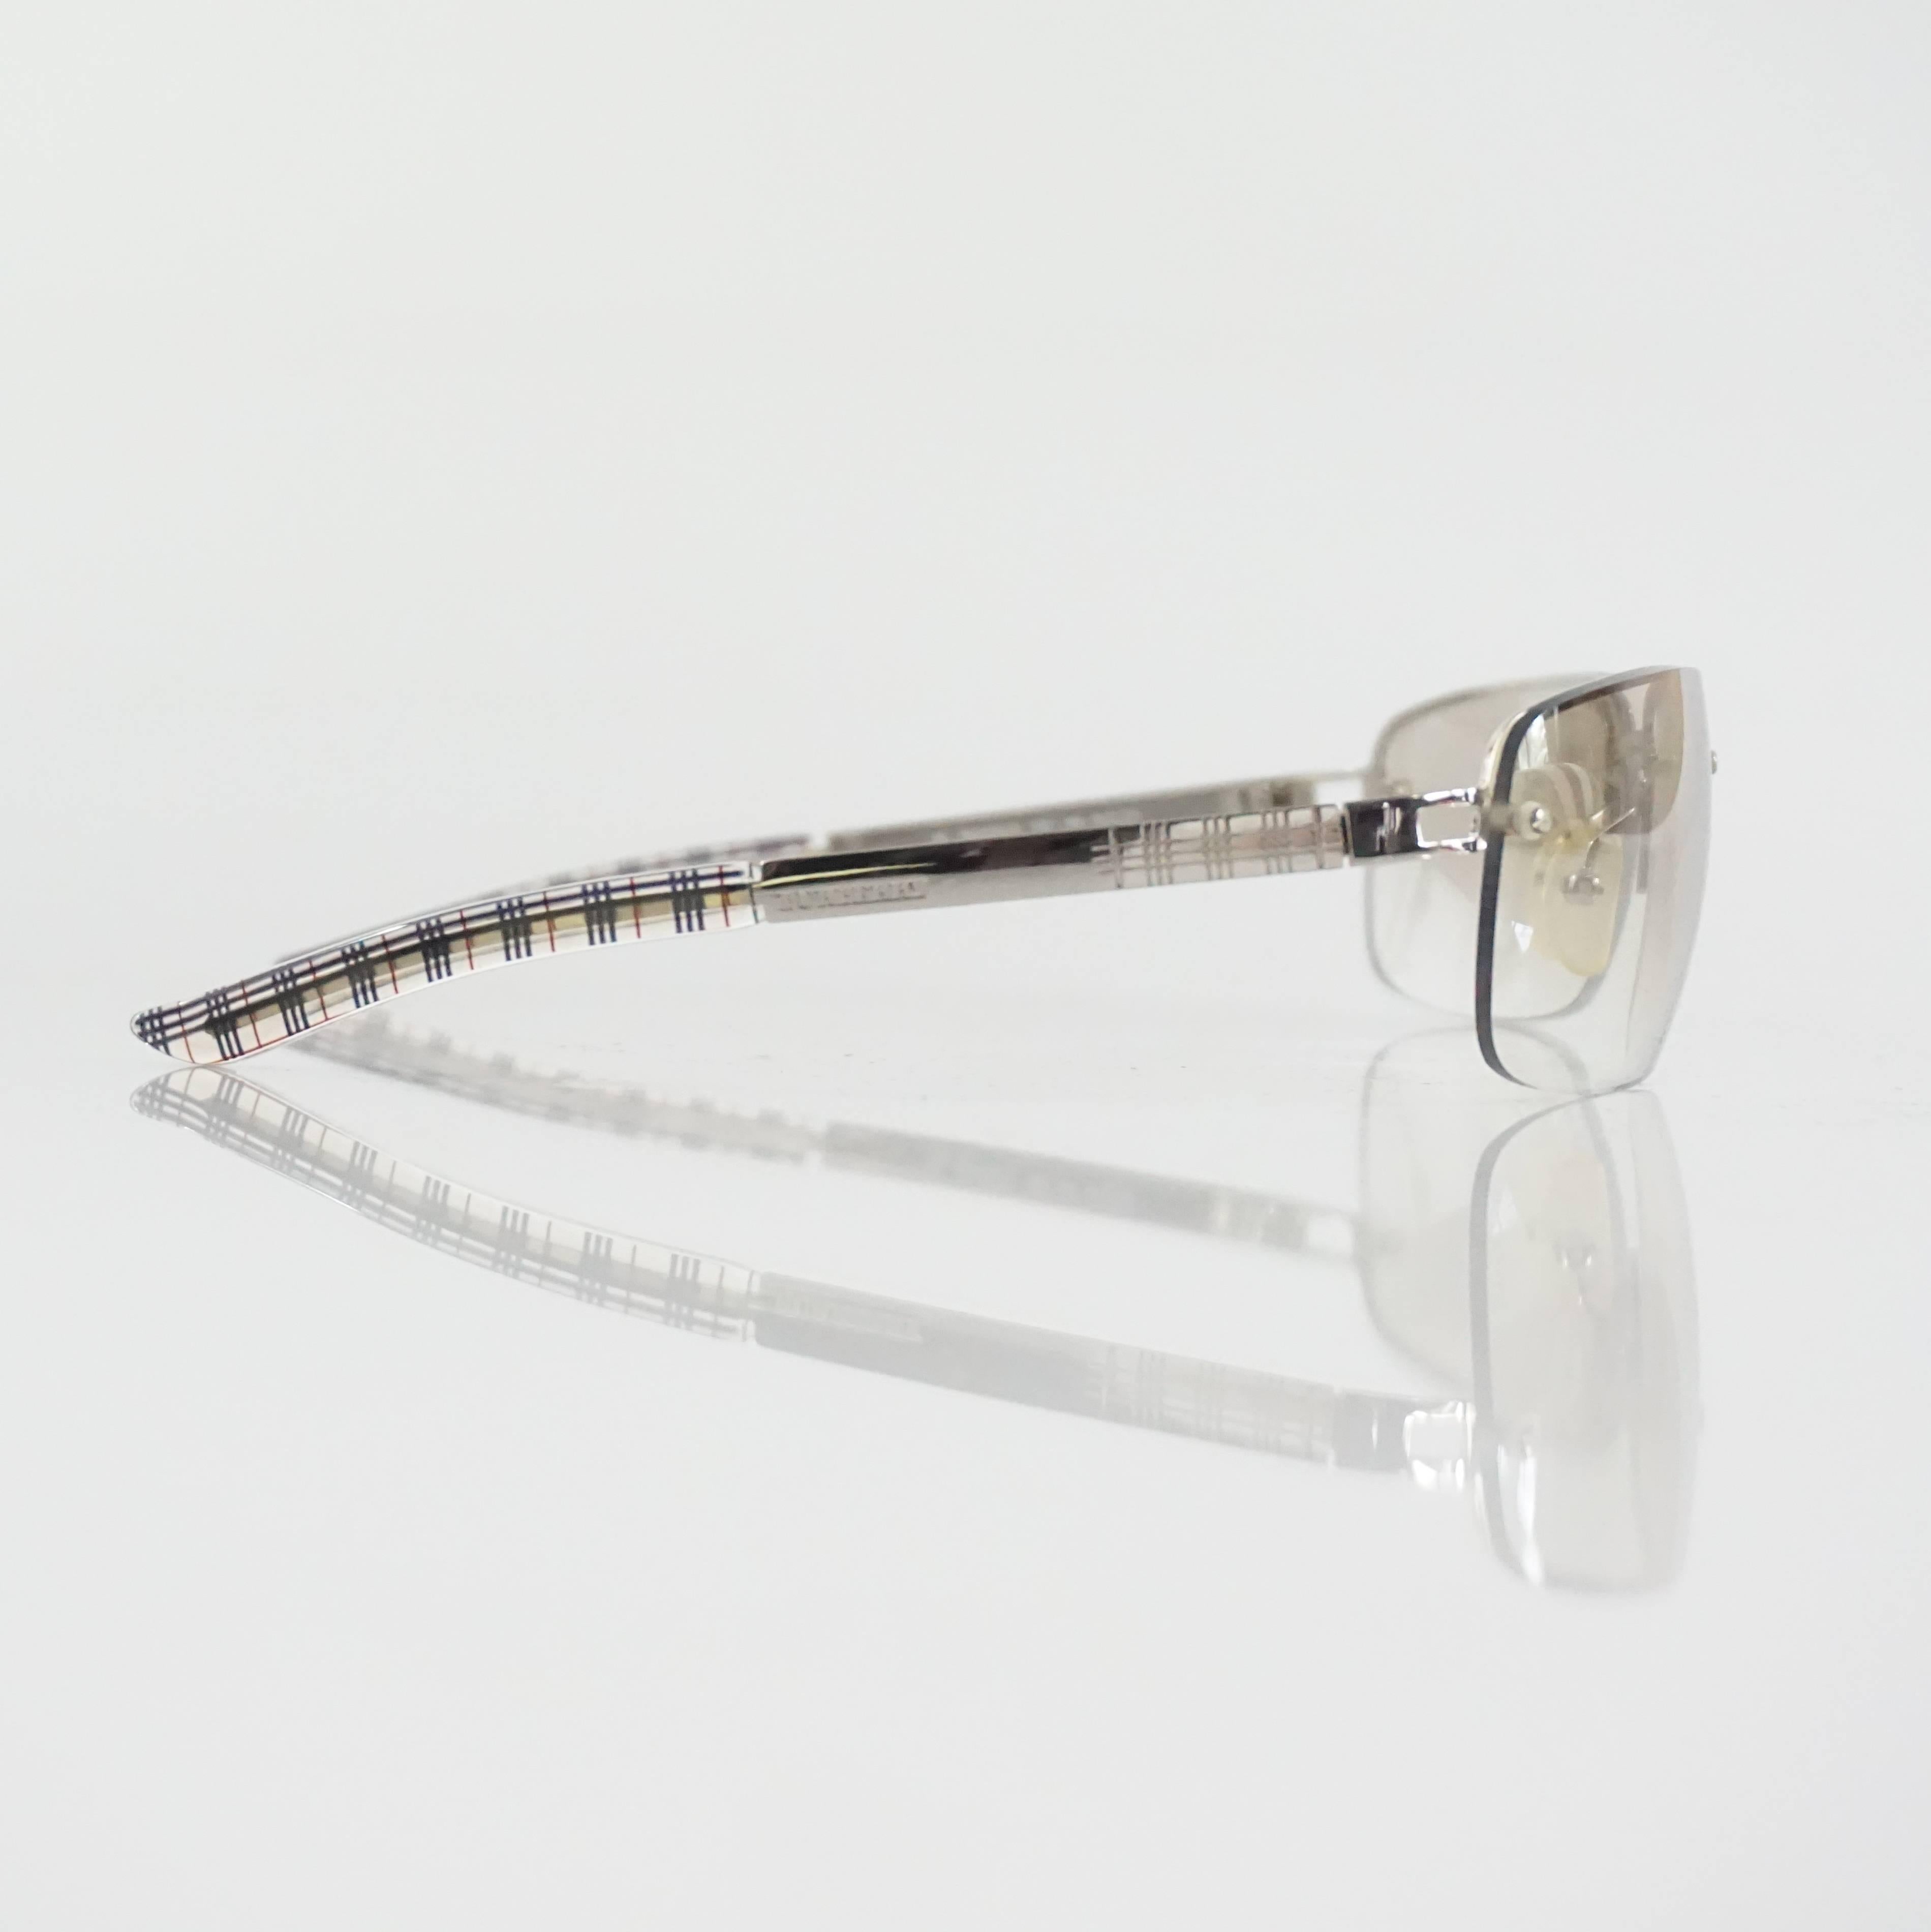 These Burberry sunglasses have small silver lenses. The legs are silver and the iconic Burberry print. They are in good condition with overall wear and comes with a case.

Measurements
Front Length: 5.13"
Leg Length: about 4.75"
Height of